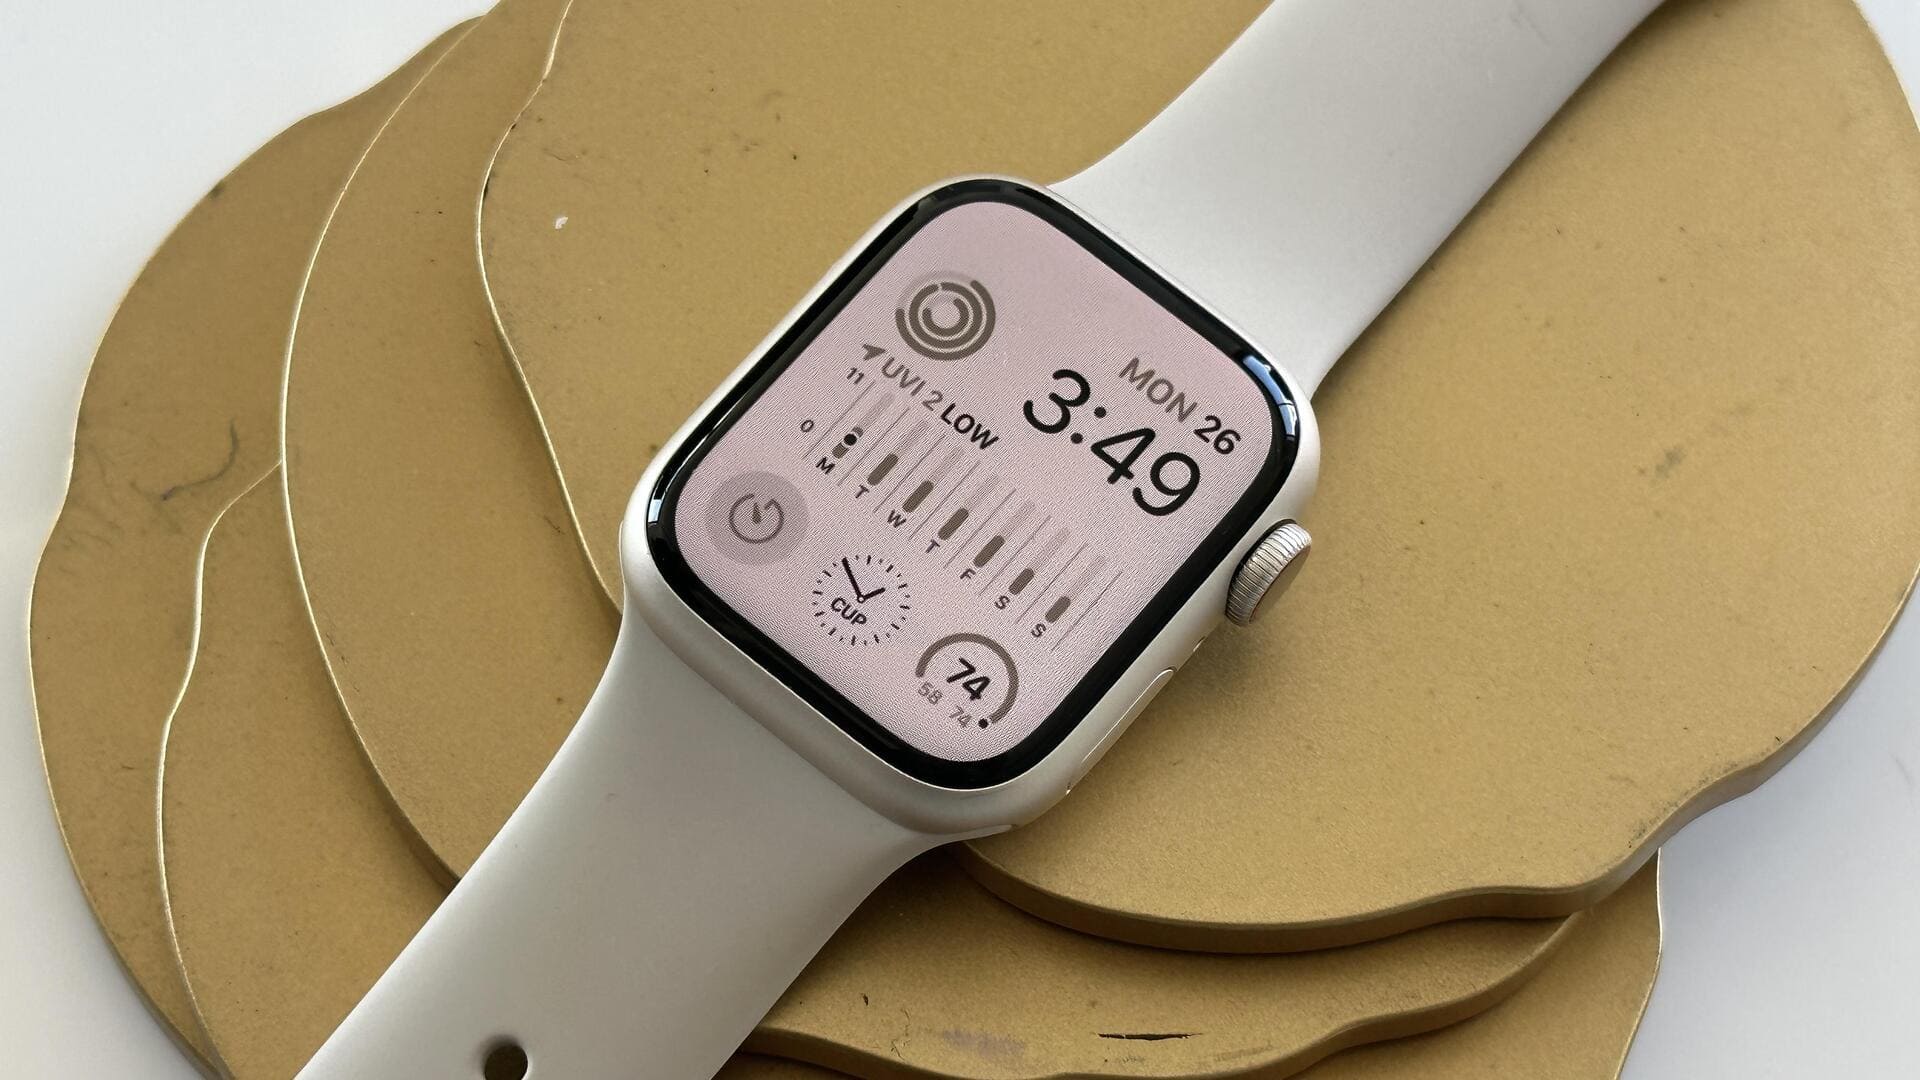 Apple acknowledges 'ghost touch' issue affecting multiple Apple Watch models